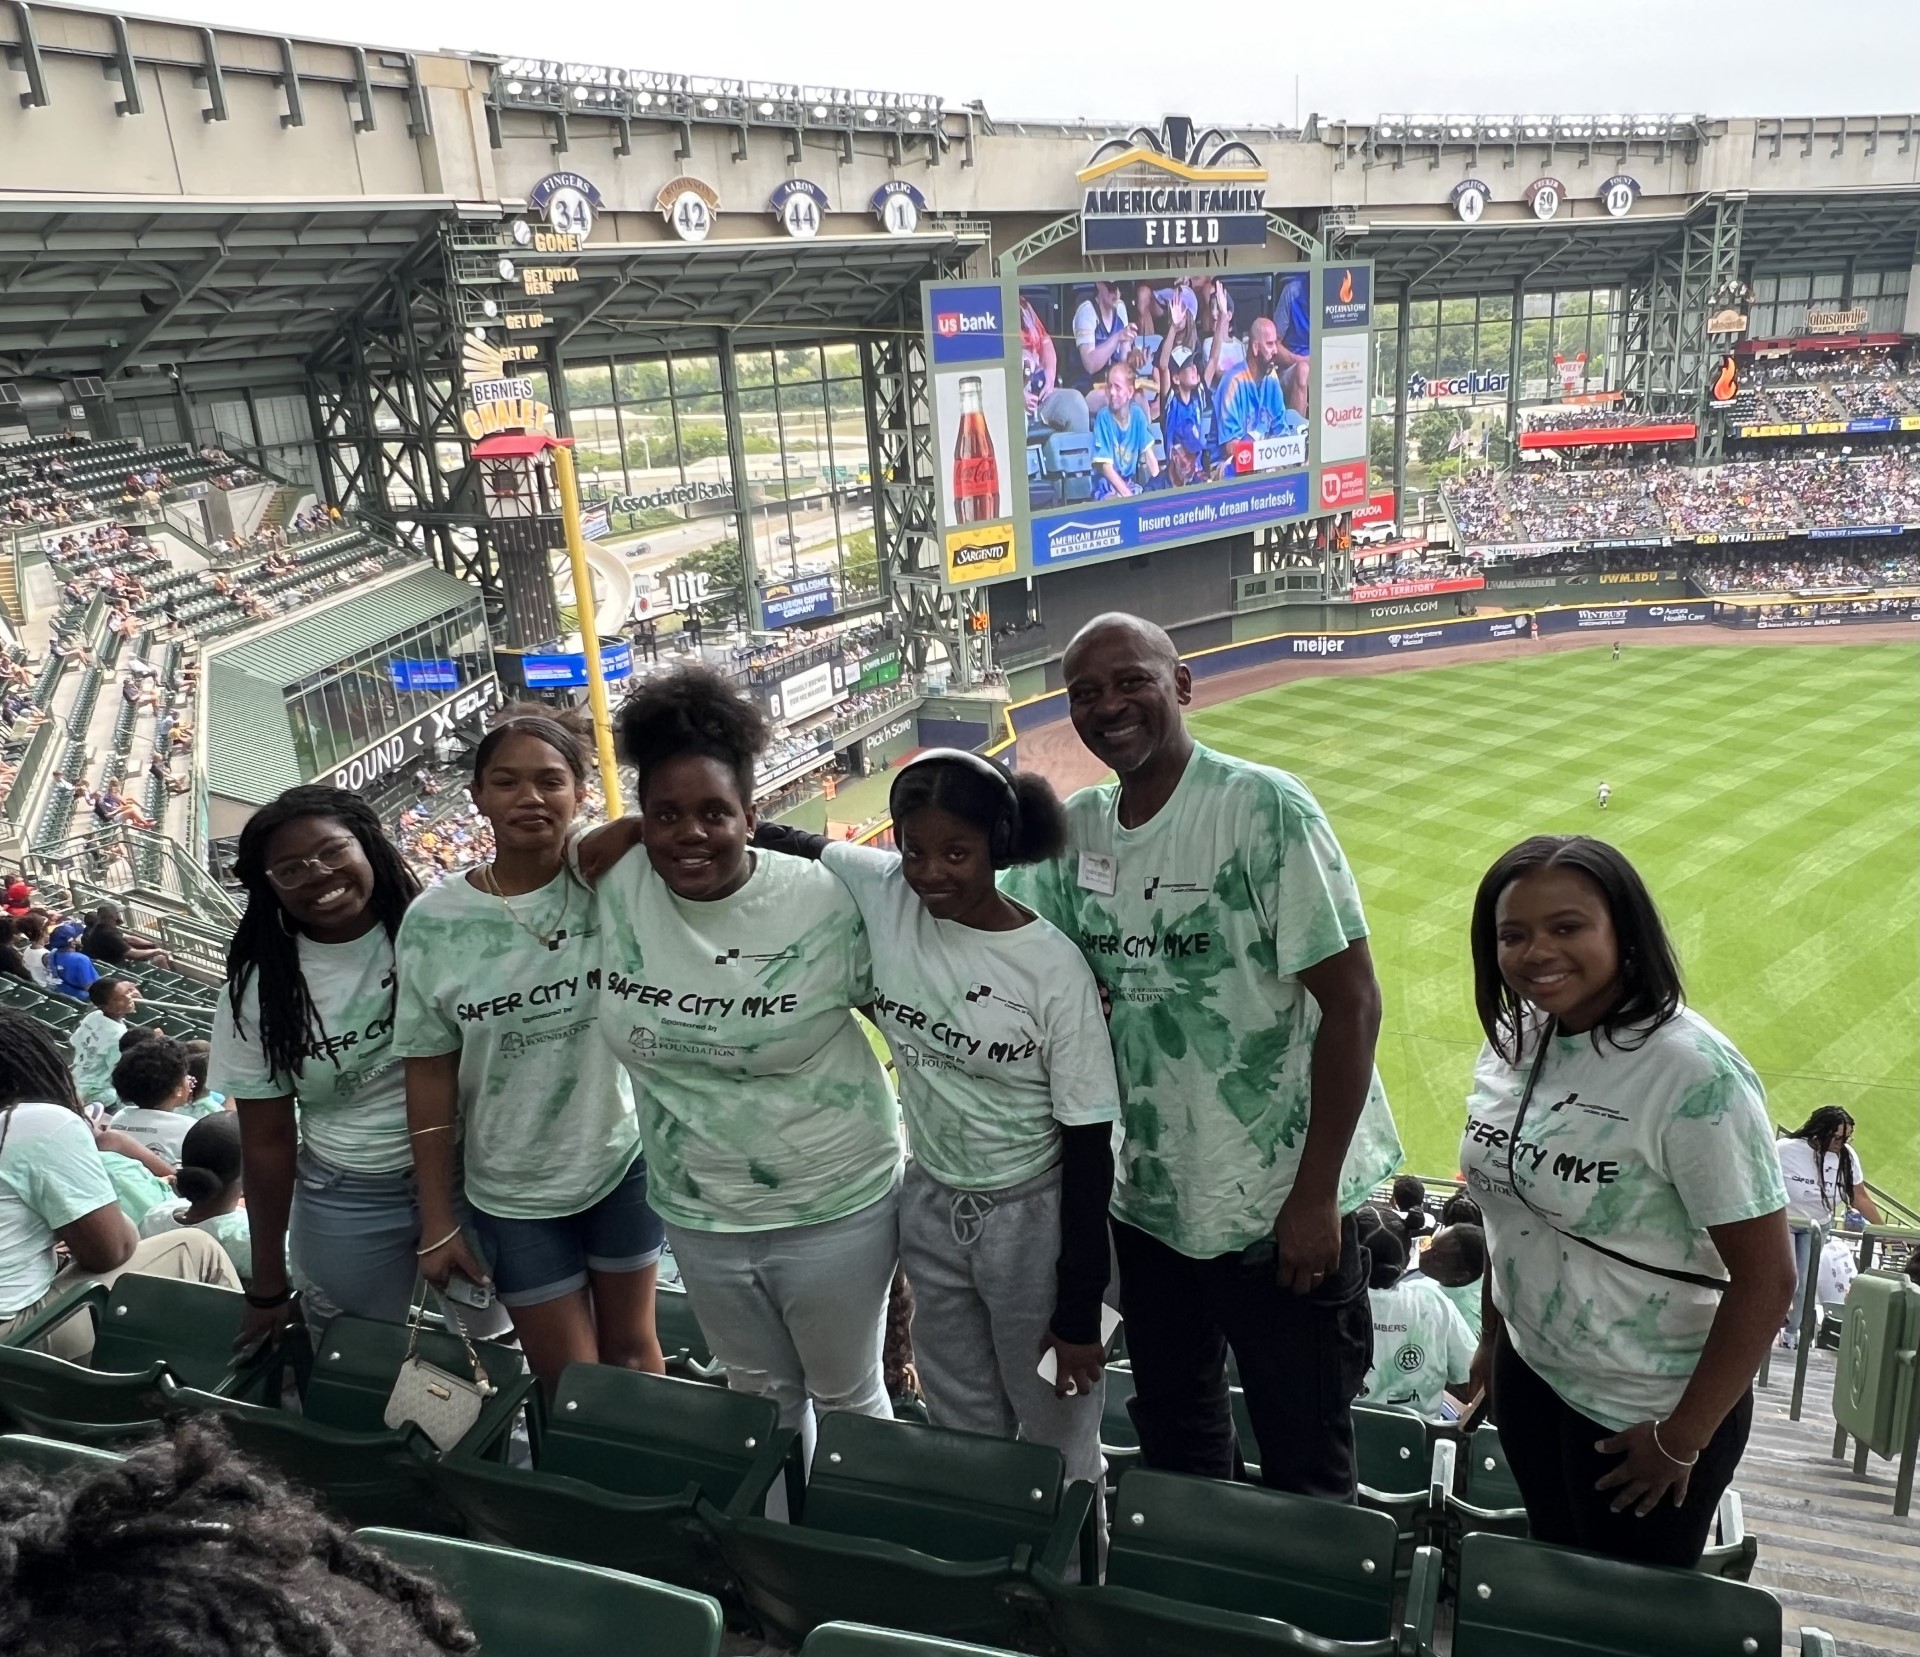 Out to the ballgame: 2K Milwaukee kids take in Brewers game as part of Safer City MKE initiative